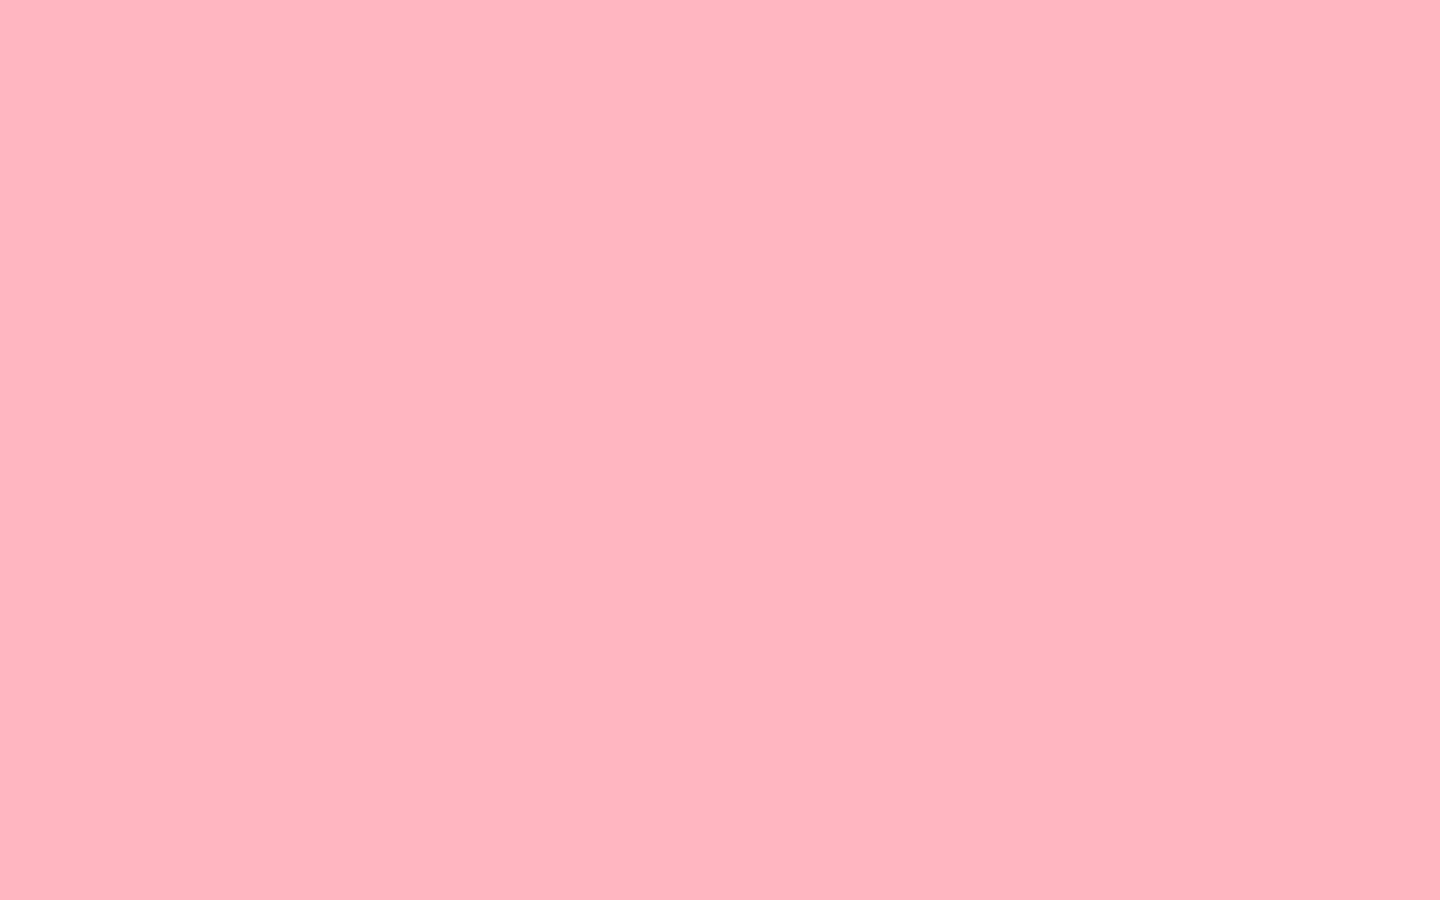 Free 1440x900 resolution Light Pink solid color background view and 1440x900